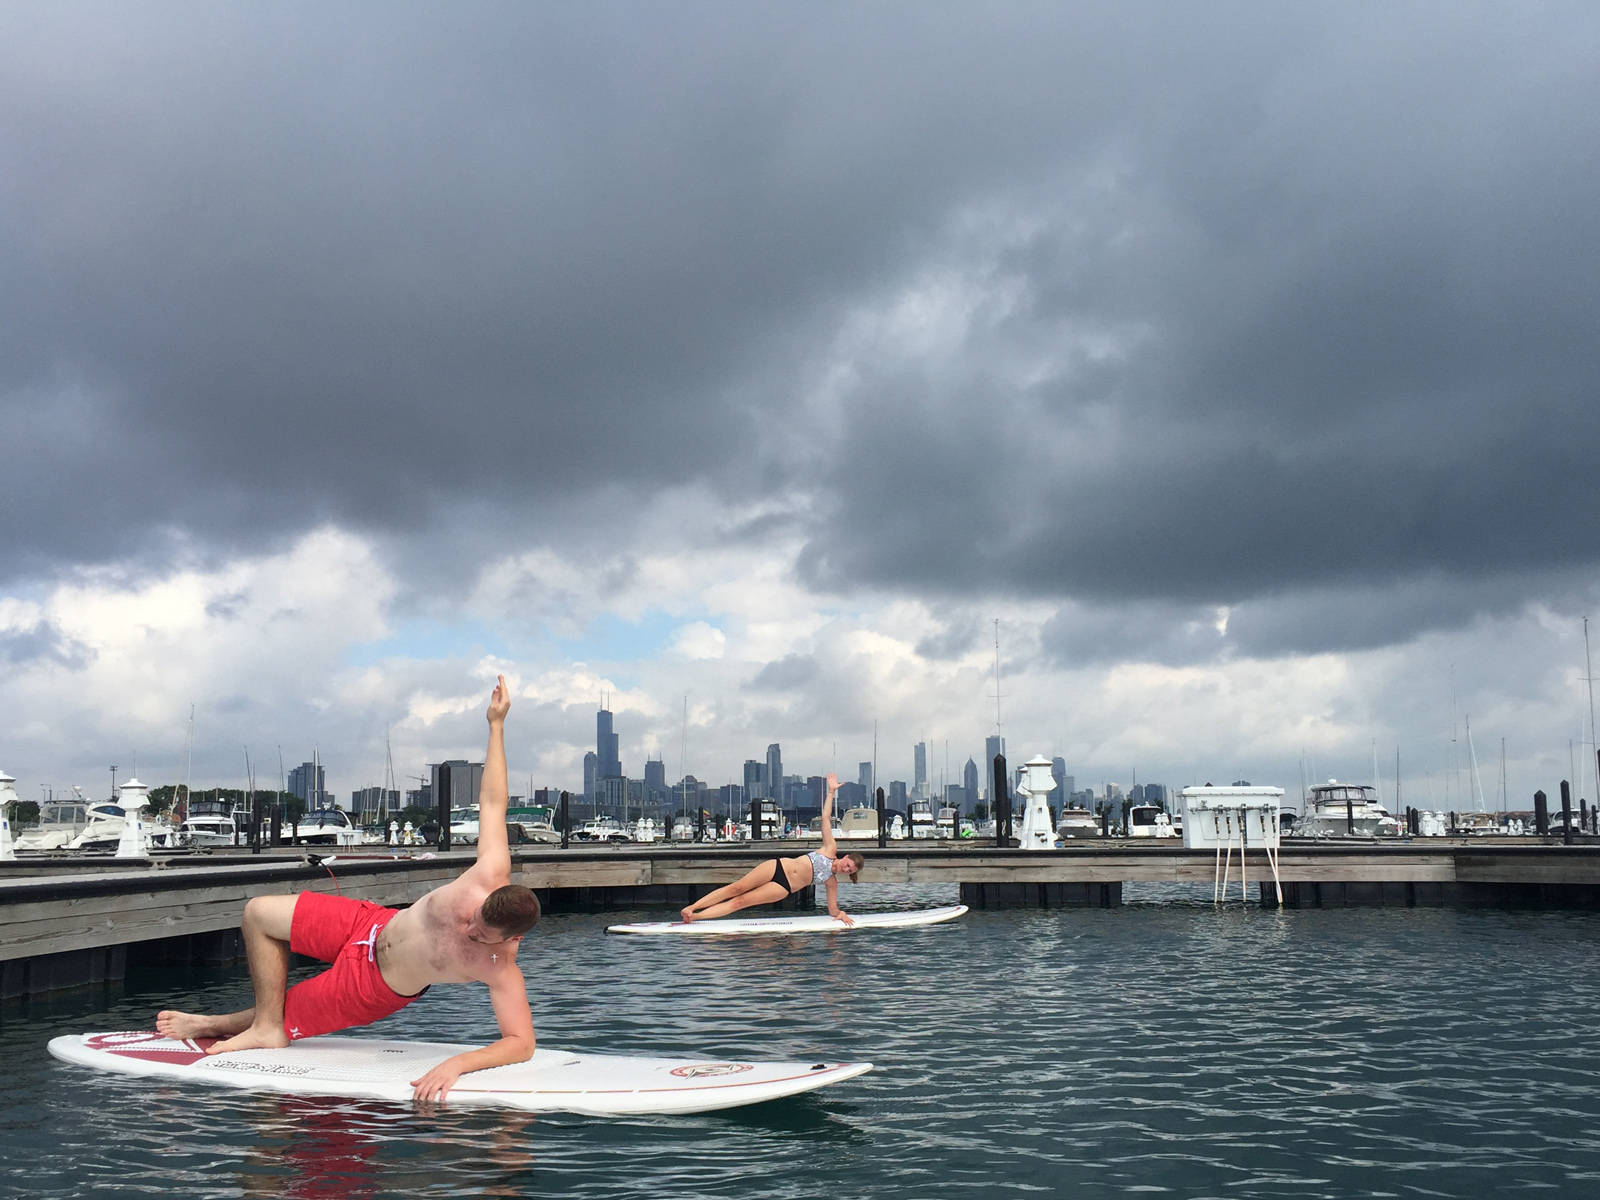 Royal Pigeon Yoga SUP Yoga in Chicago 31st St Harbor